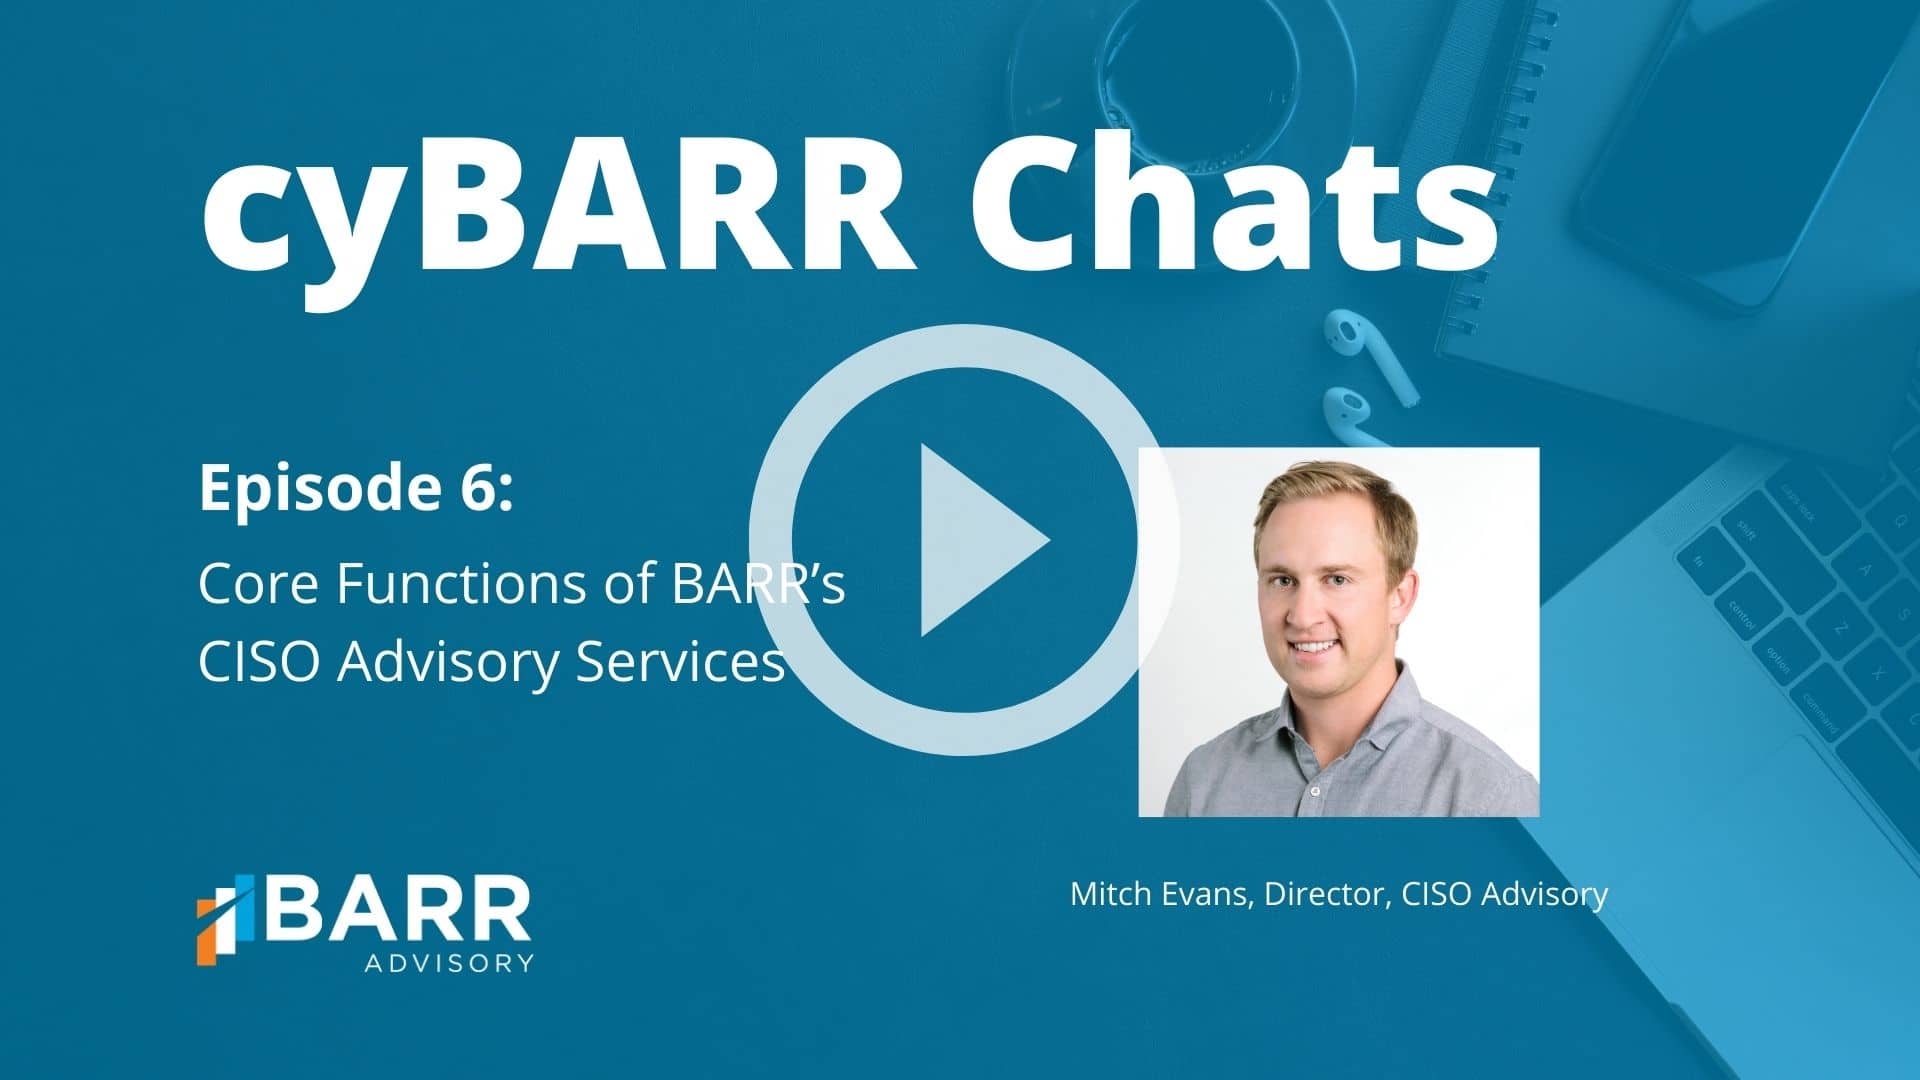 cyBARR Chat Episode 7: Implementing an Information Security Program